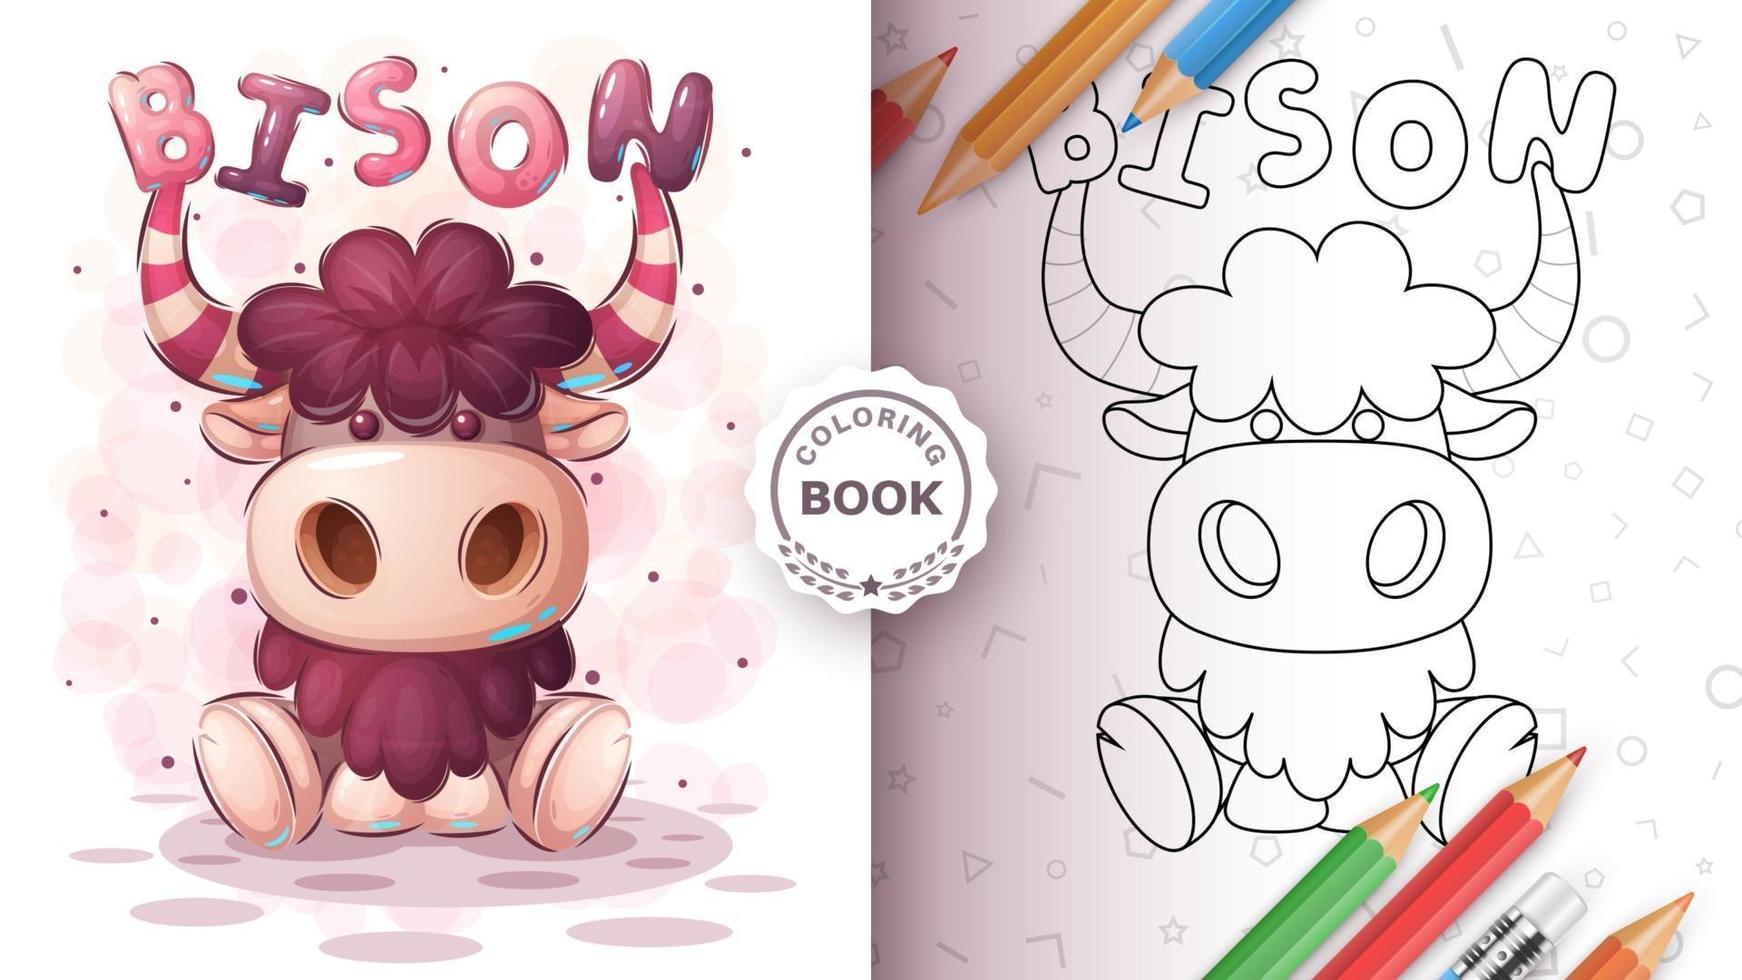 Funny bison cartoon character coloring book vector